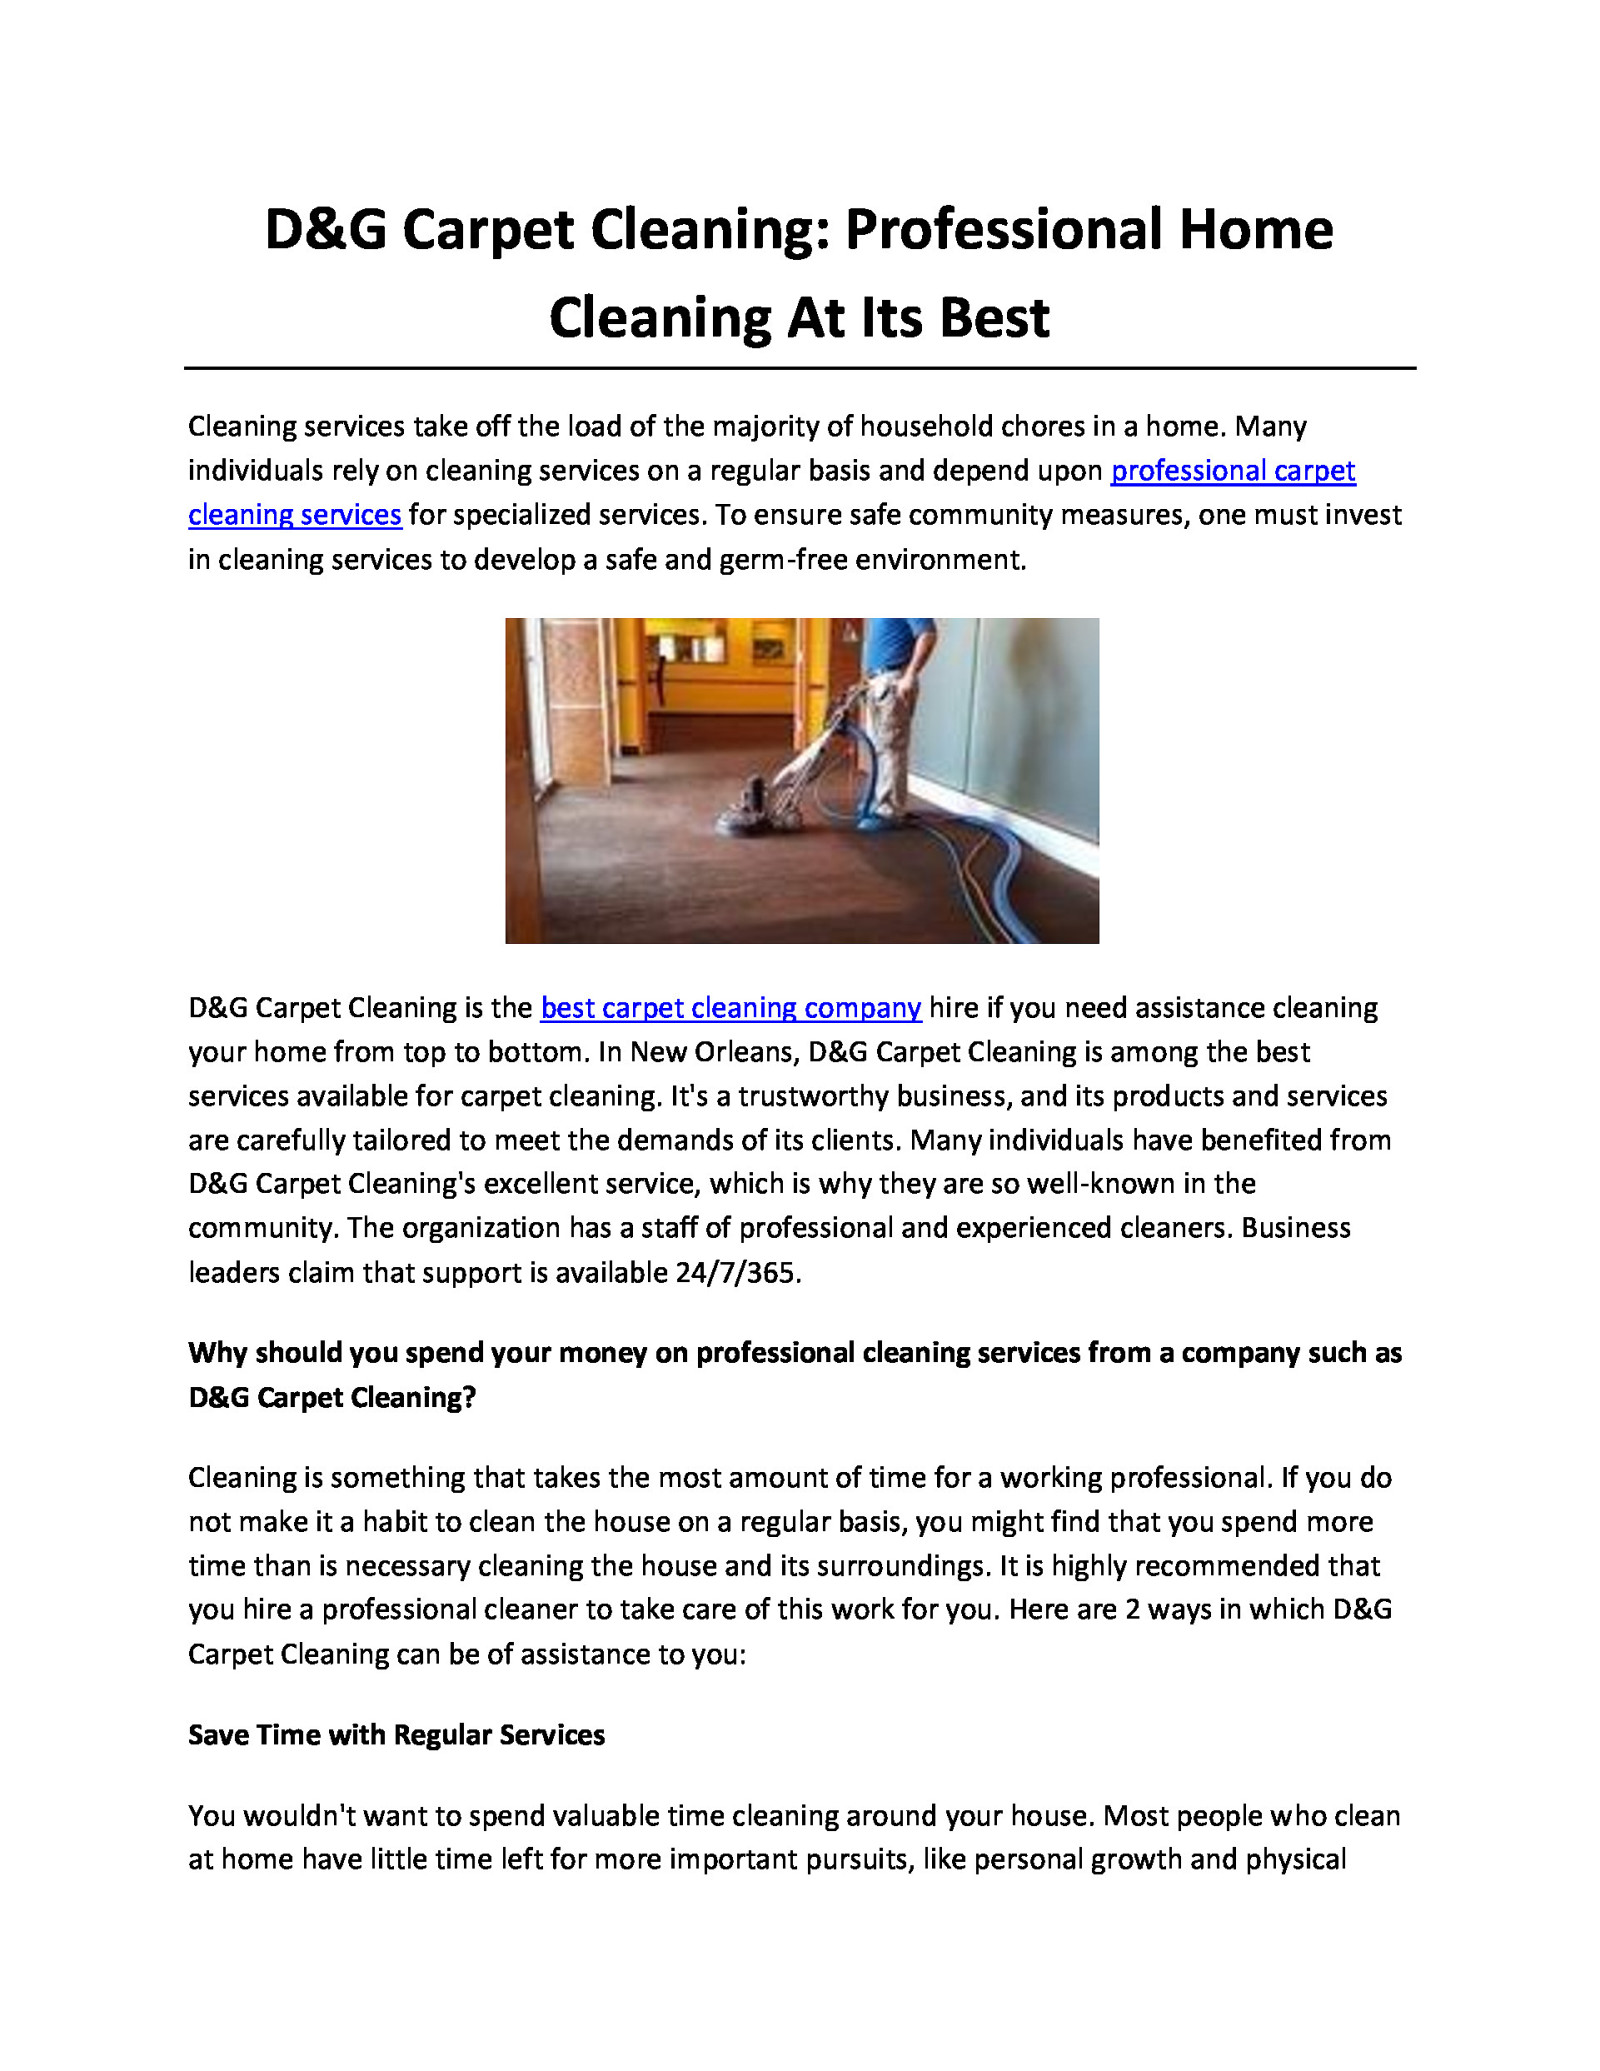 D&G Carpet Cleaning: Professional Home Cleaning At Its Best